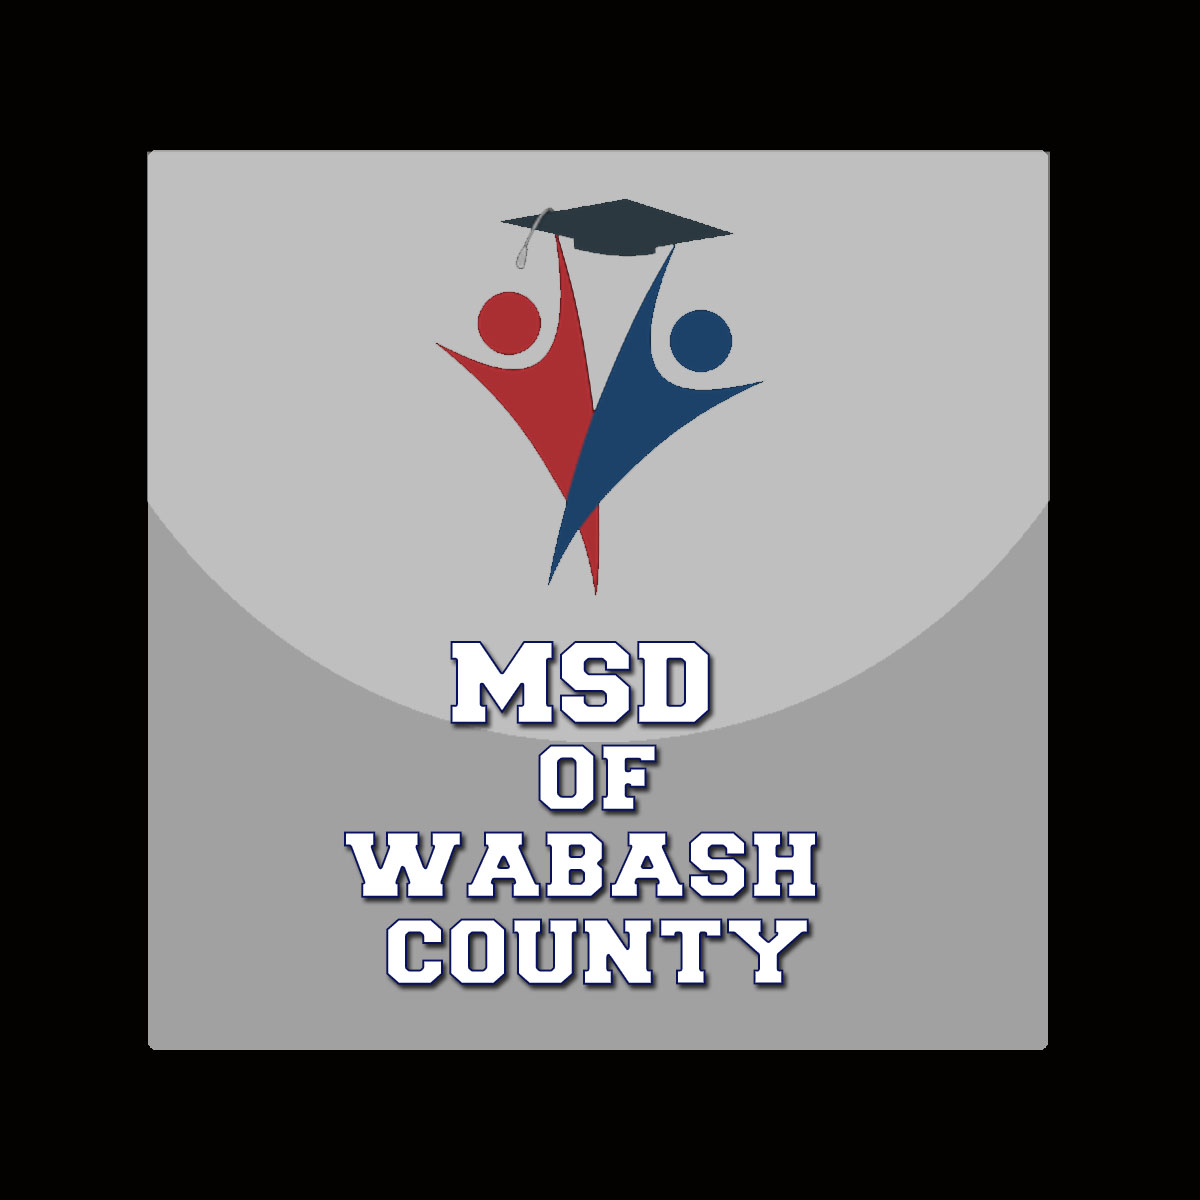 MSD of Wabash County